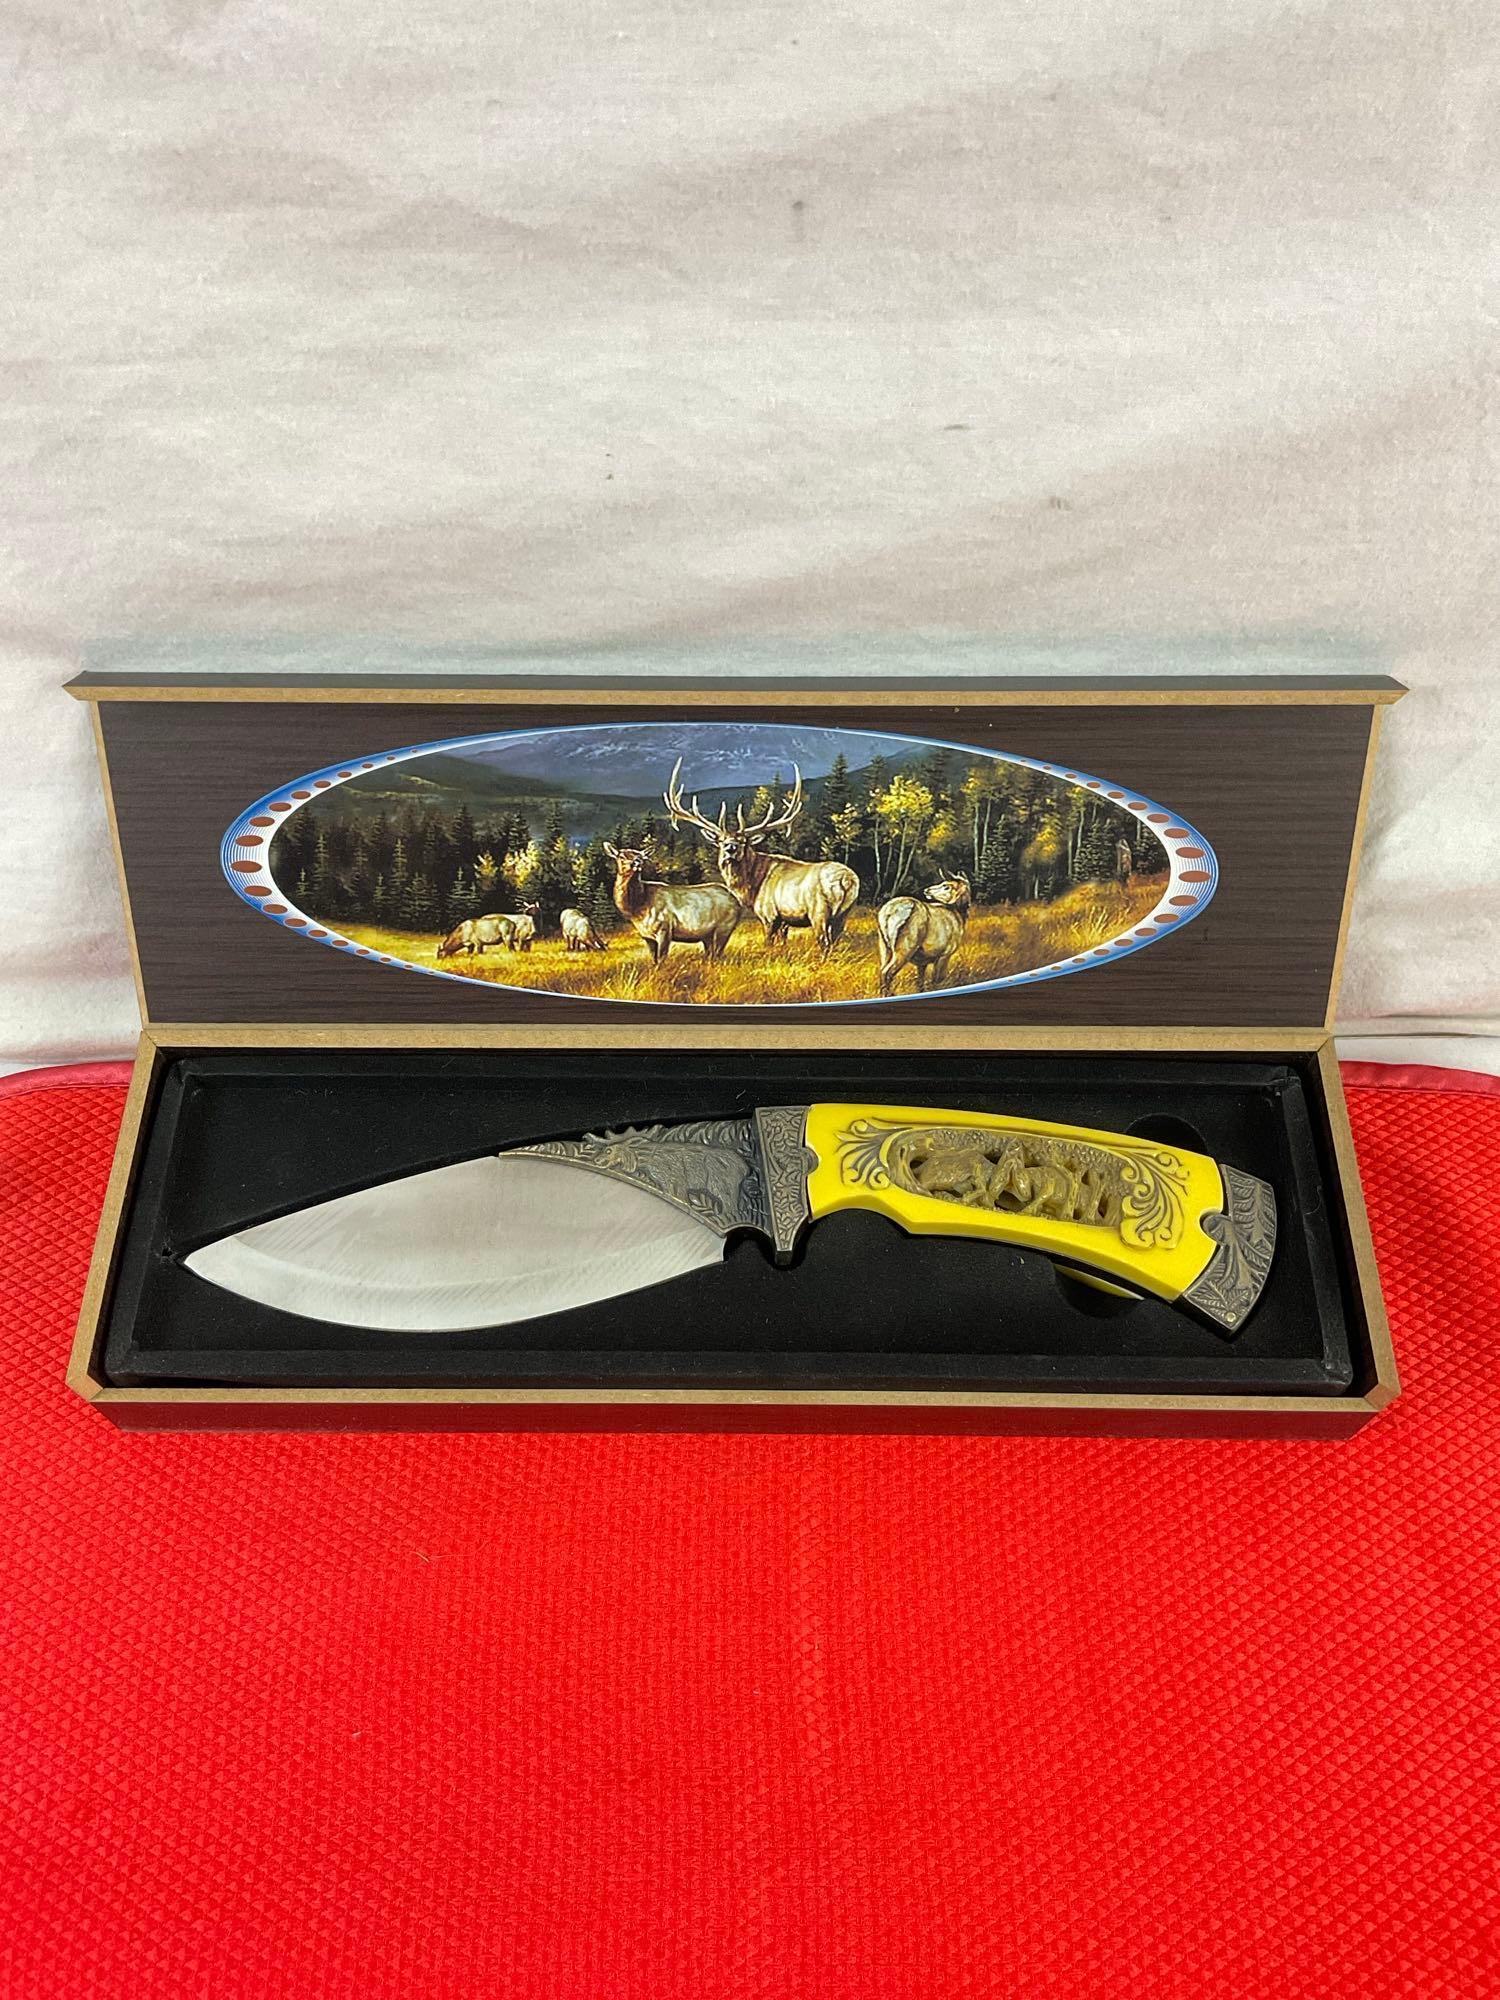 Stainless Steel 5" Fixed Blade Knife w/ Elk Herd Carved Resin Handle & Etched Blade. See pics.